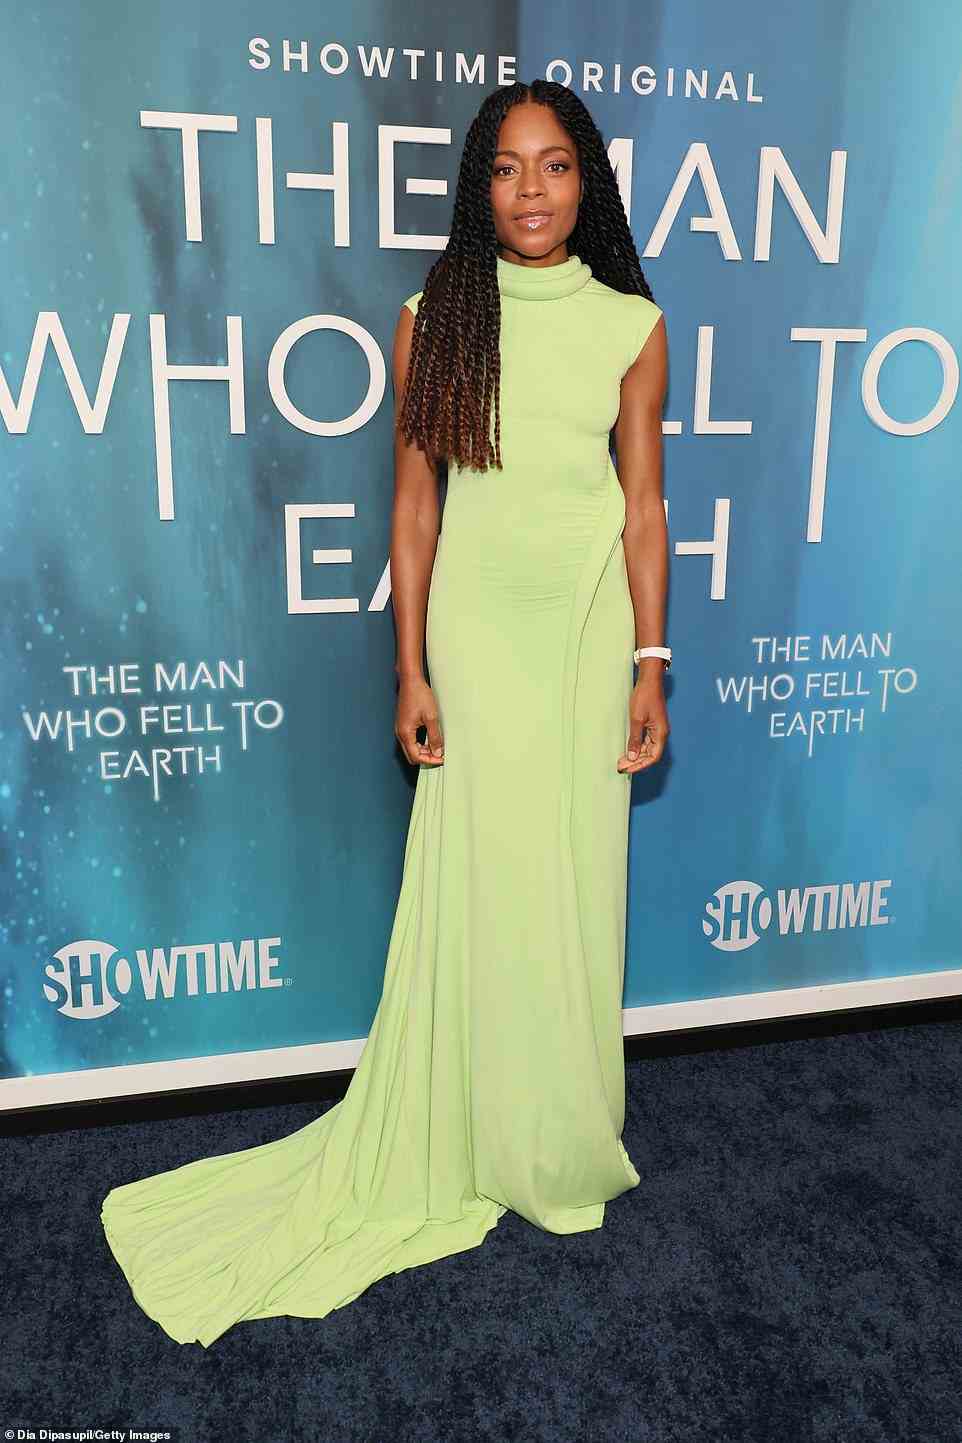 In the Big Apple! Oscar-nominated actress Naomie Harris glammed up for the premiere of Showtime's The Man Who Fell to Earth at the Museum of Modern Art in Manhattan's Midtown neighborhood on Tuesday